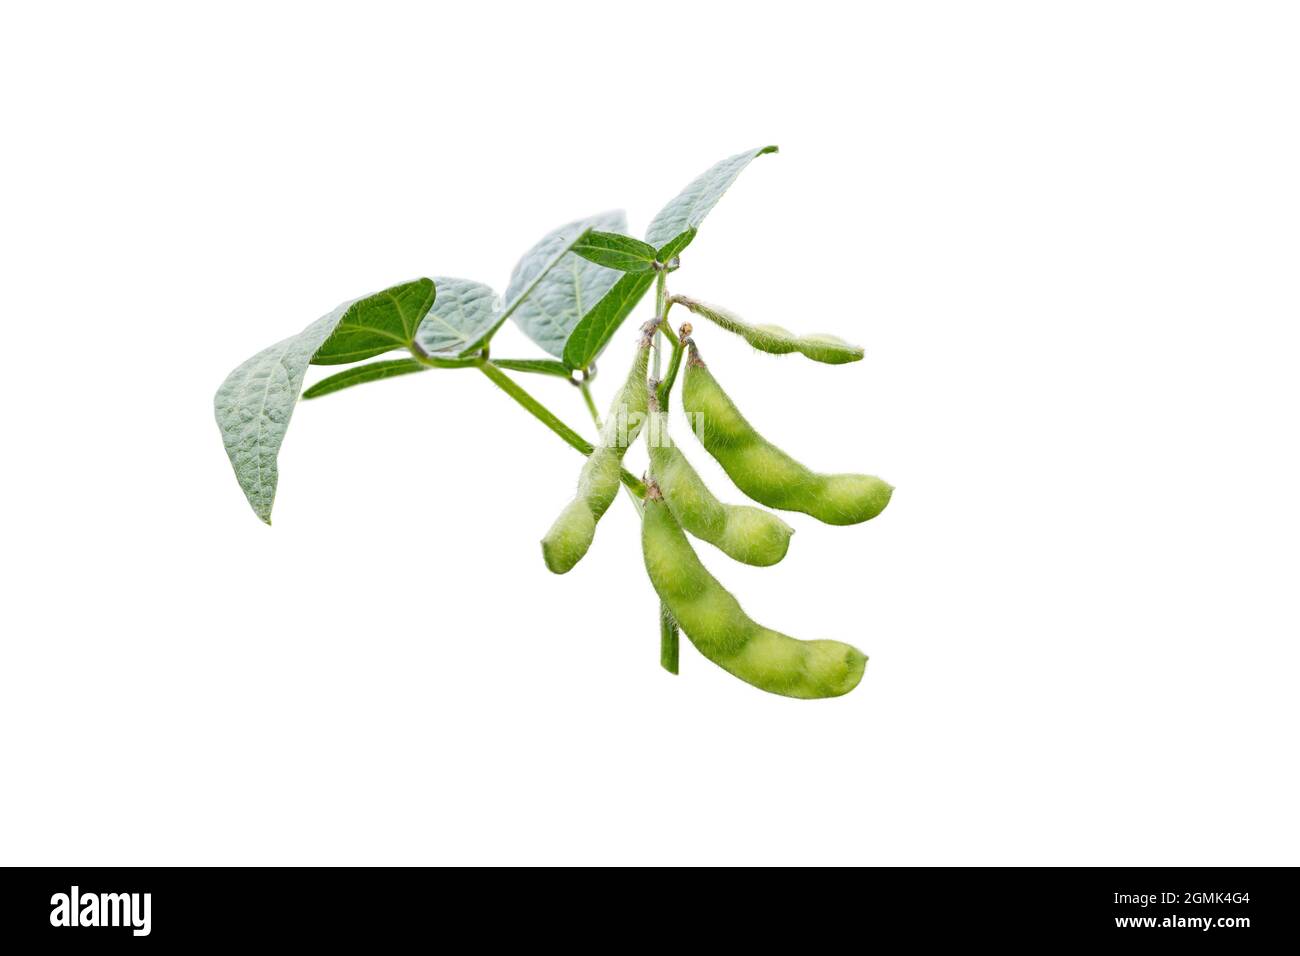 Glycine max plant with beans and leaves. Soybean or soya bean branch isolated on white. Stock Photo